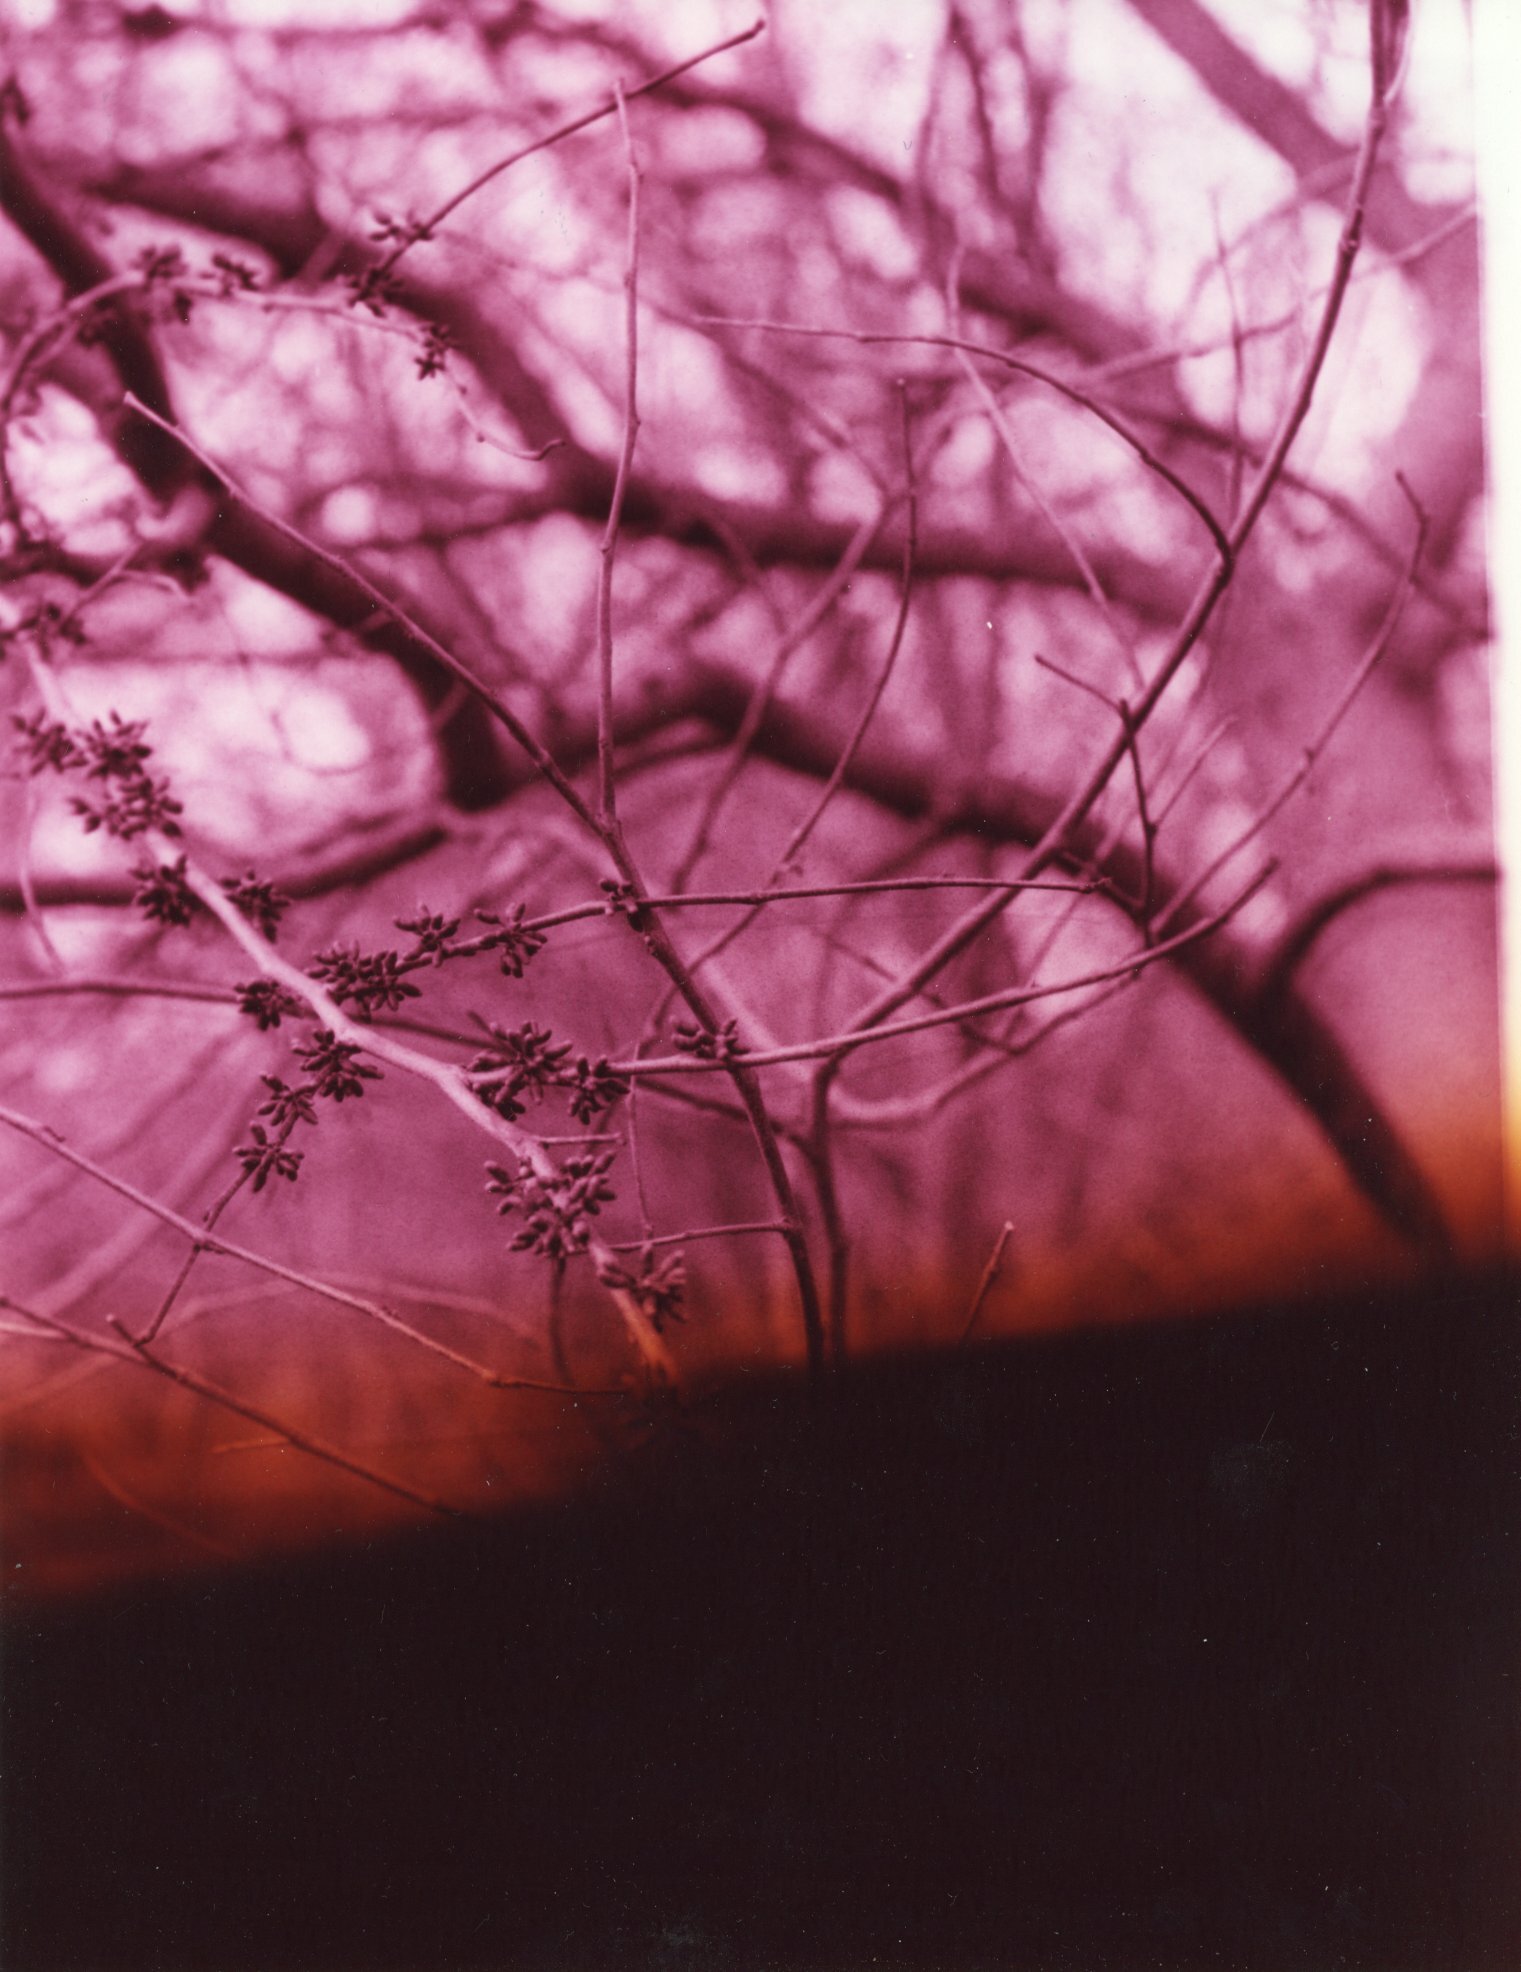 RED BUD | 20 x 16 inches / 50.8 x 40.64 cm, chromogenic photograph, edition 1/1, 2021